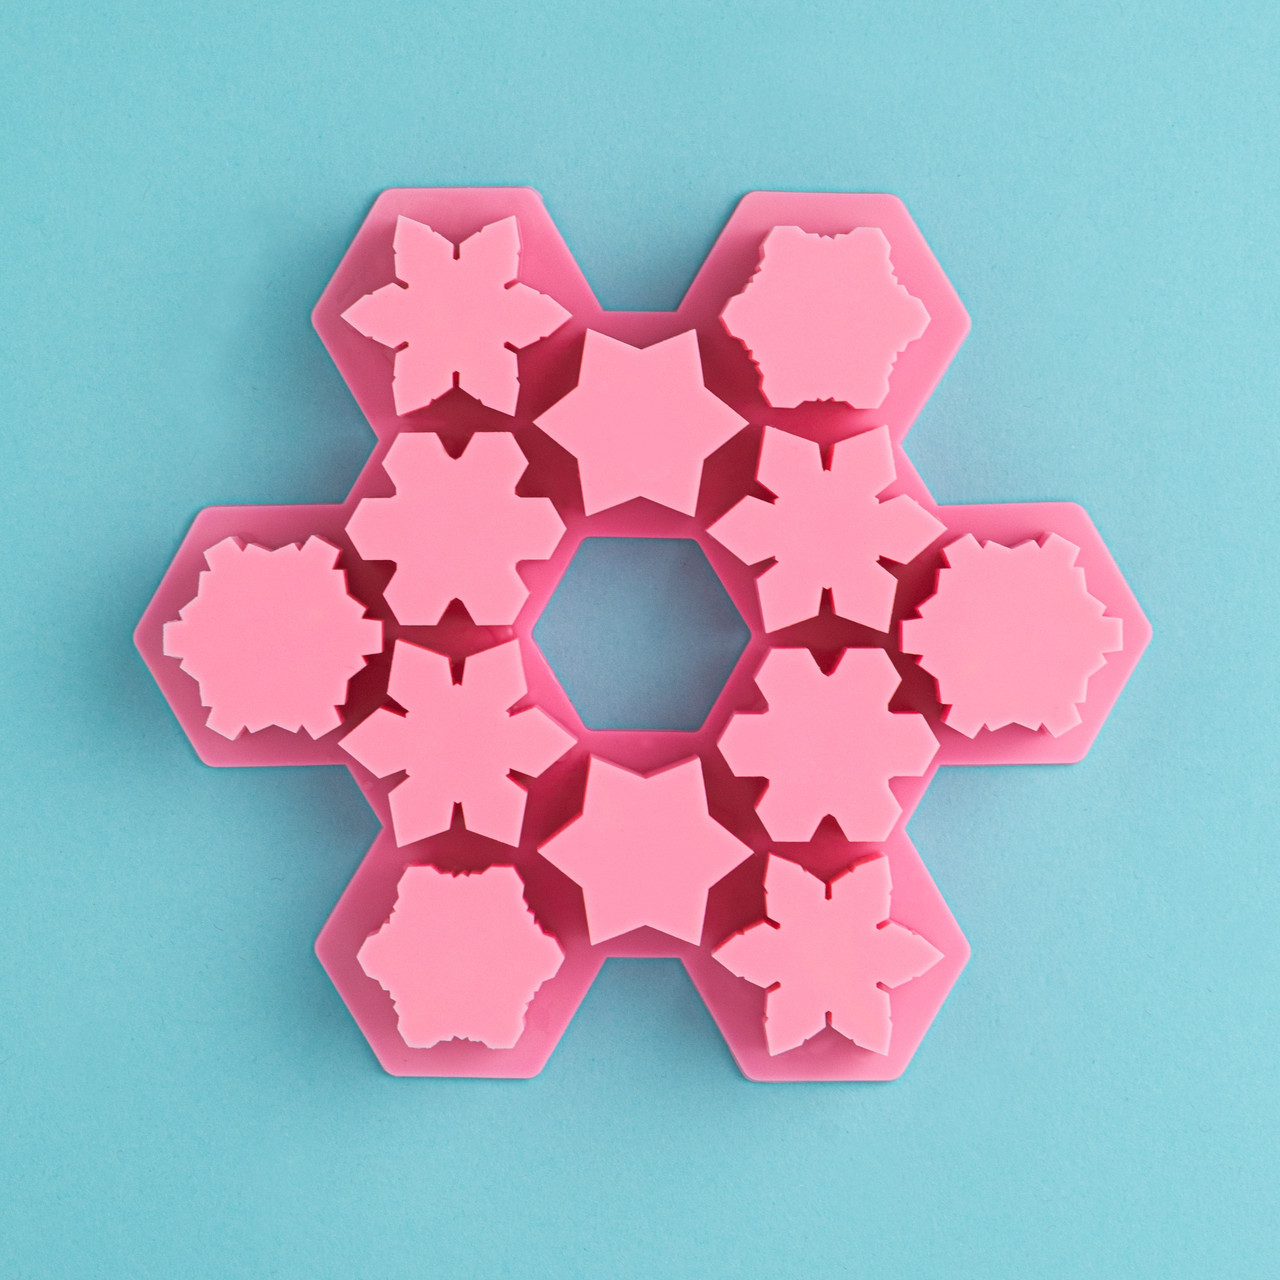 https://cdn11.bigcommerce.com/s-74757430ww/images/stencil/1280x1280/products/2079/7190/Snowflake-Mini-Silicone-Mold-__67659.1669813601.jpg?c=1